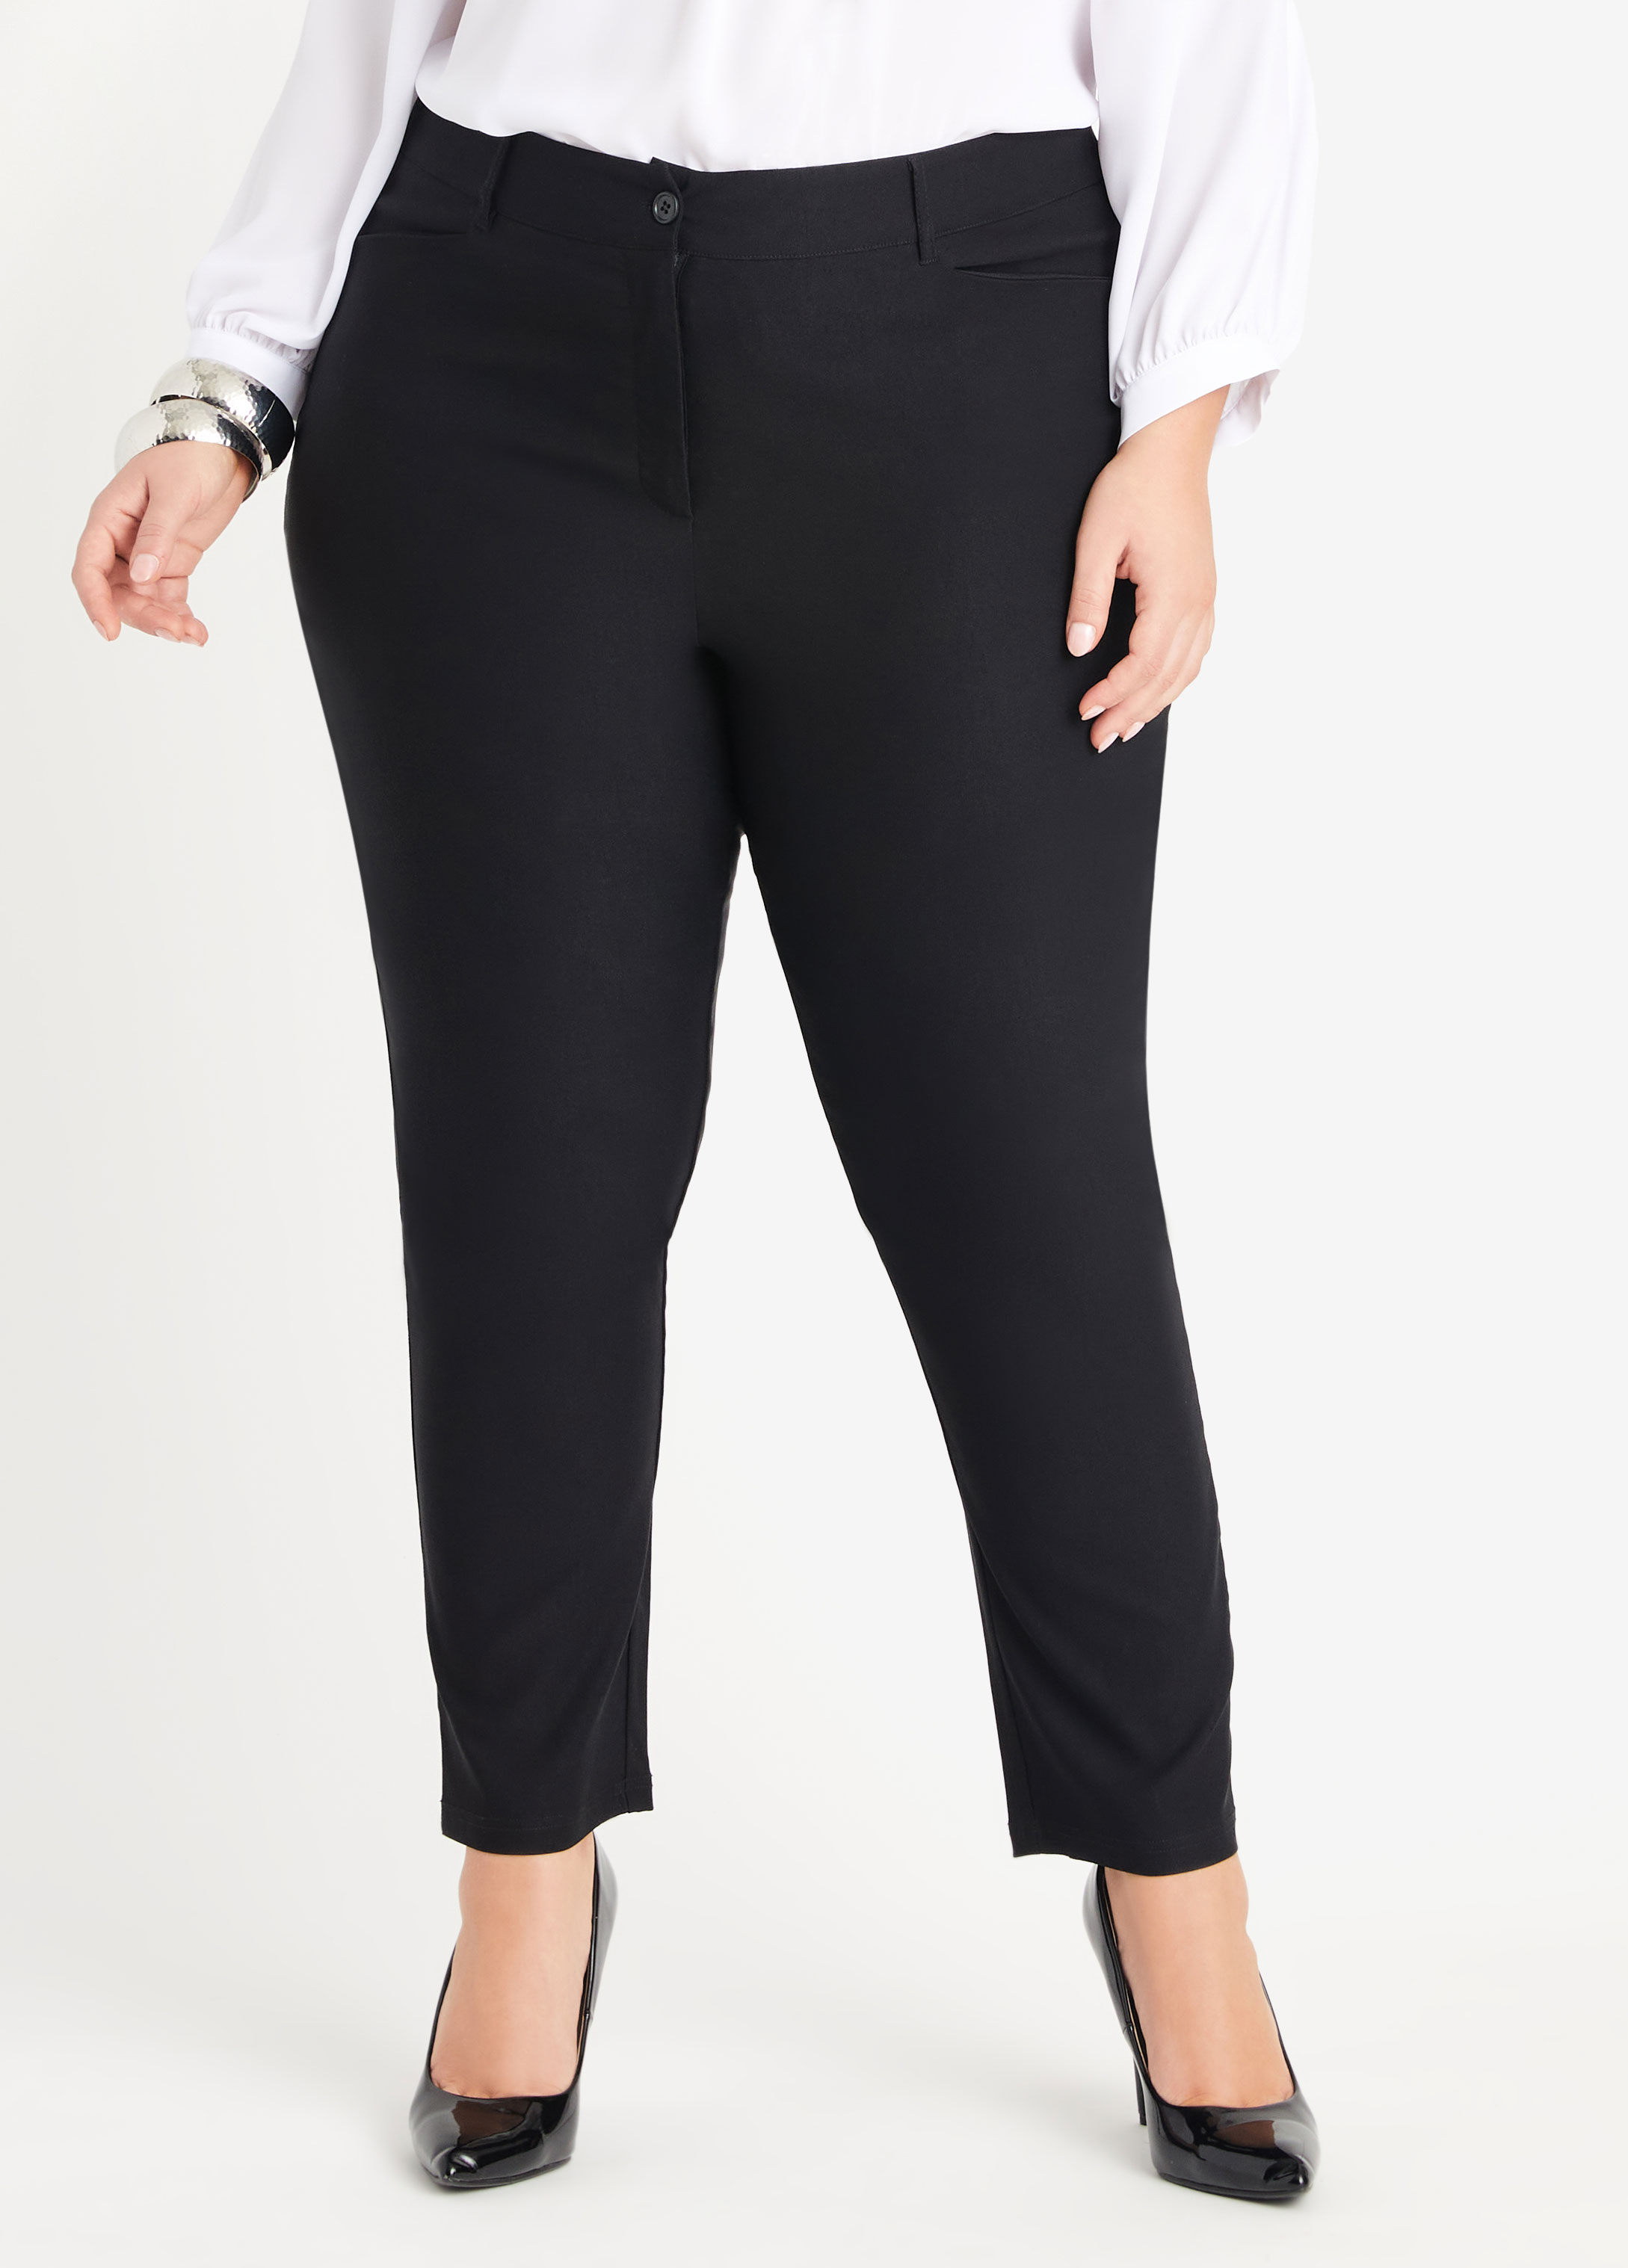 Plus Size Black Stretch Ankle Pant Plus Size Suits For Womens Office wear